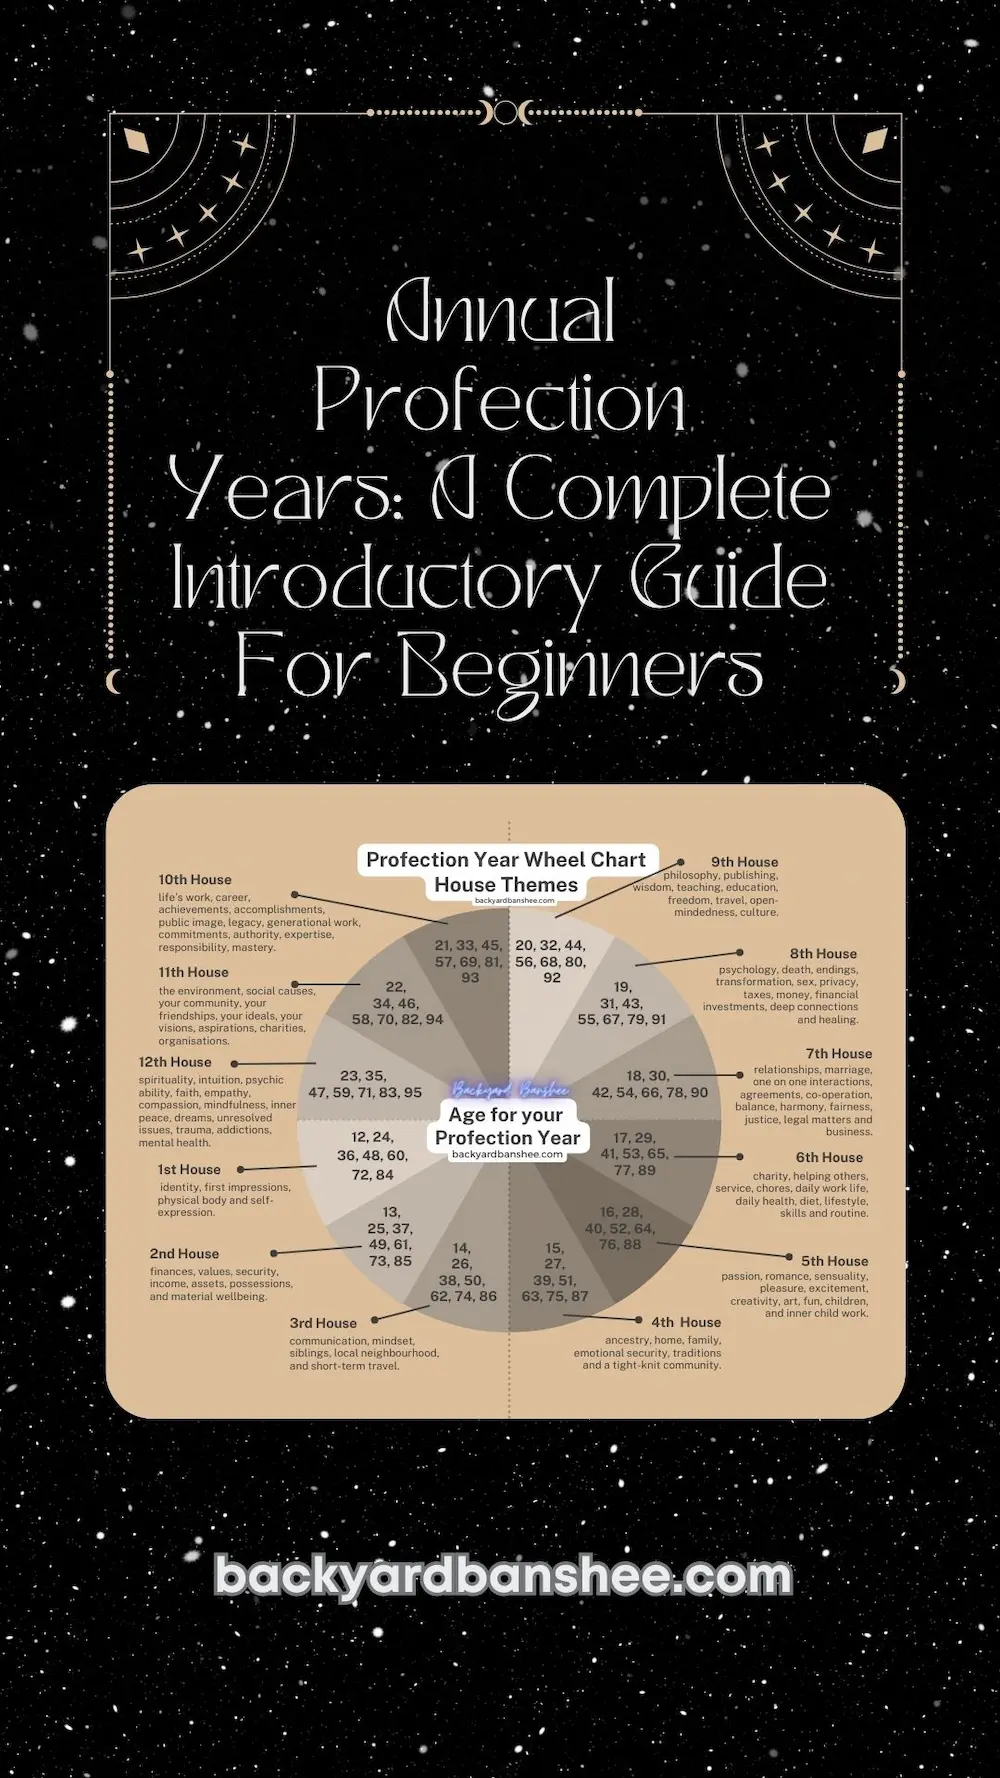 Annual Profection Years A Complete Introductory Guide To Time Lords, Profection Year Themes,  Chart Ruler And The Houses at backyardbanshee.com